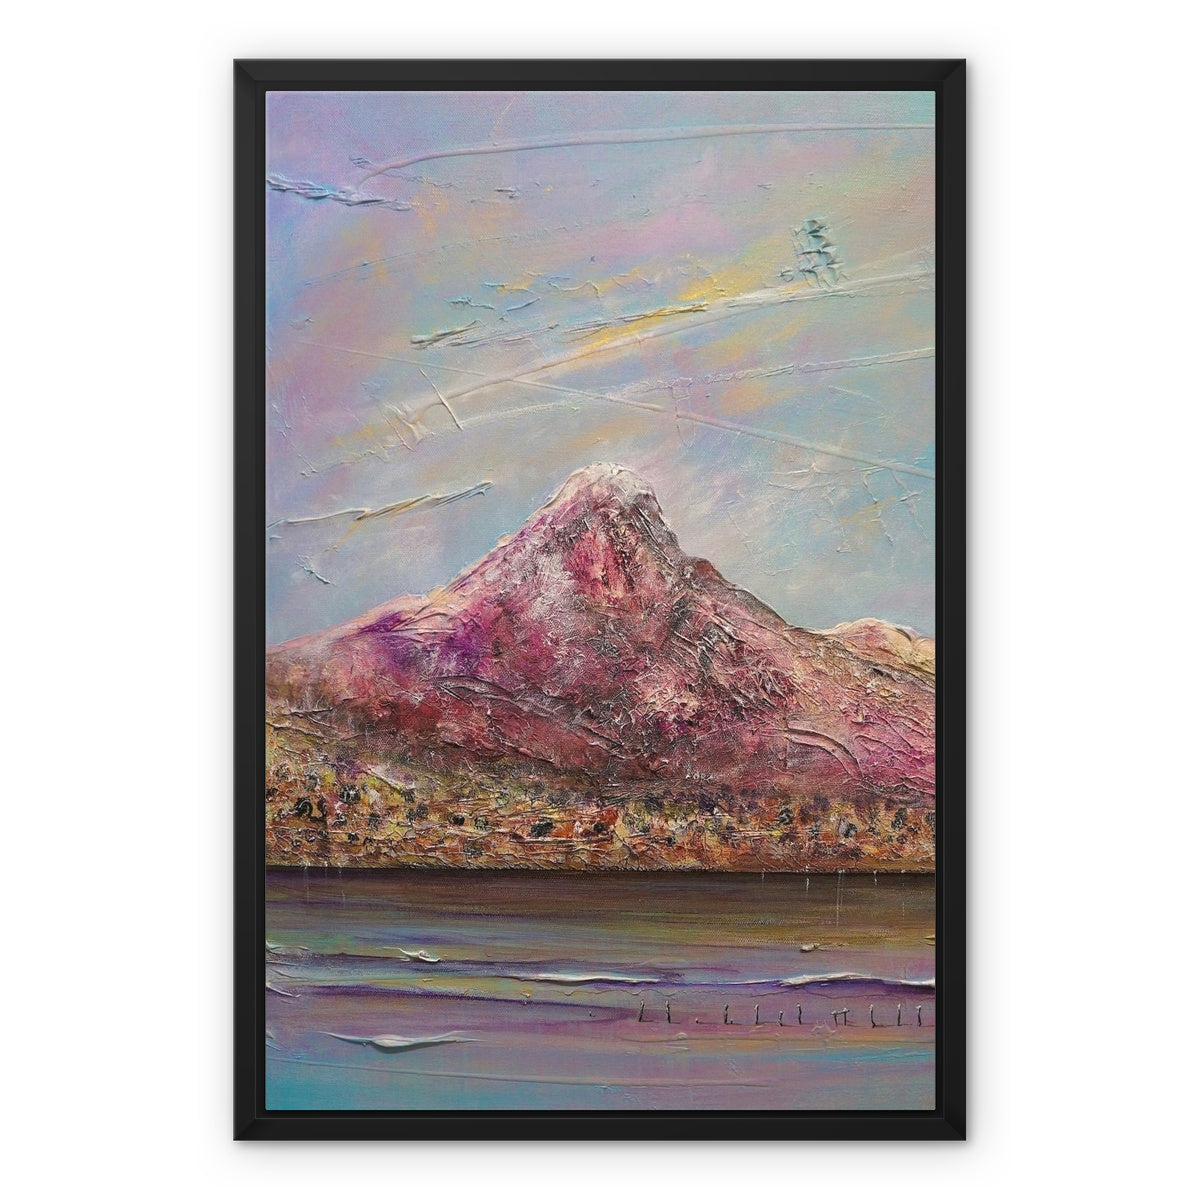 Ben Lomond Painting | Framed Canvas From Scotland-Floating Framed Canvas Prints-Scottish Lochs & Mountains Art Gallery-18"x24"-Paintings, Prints, Homeware, Art Gifts From Scotland By Scottish Artist Kevin Hunter